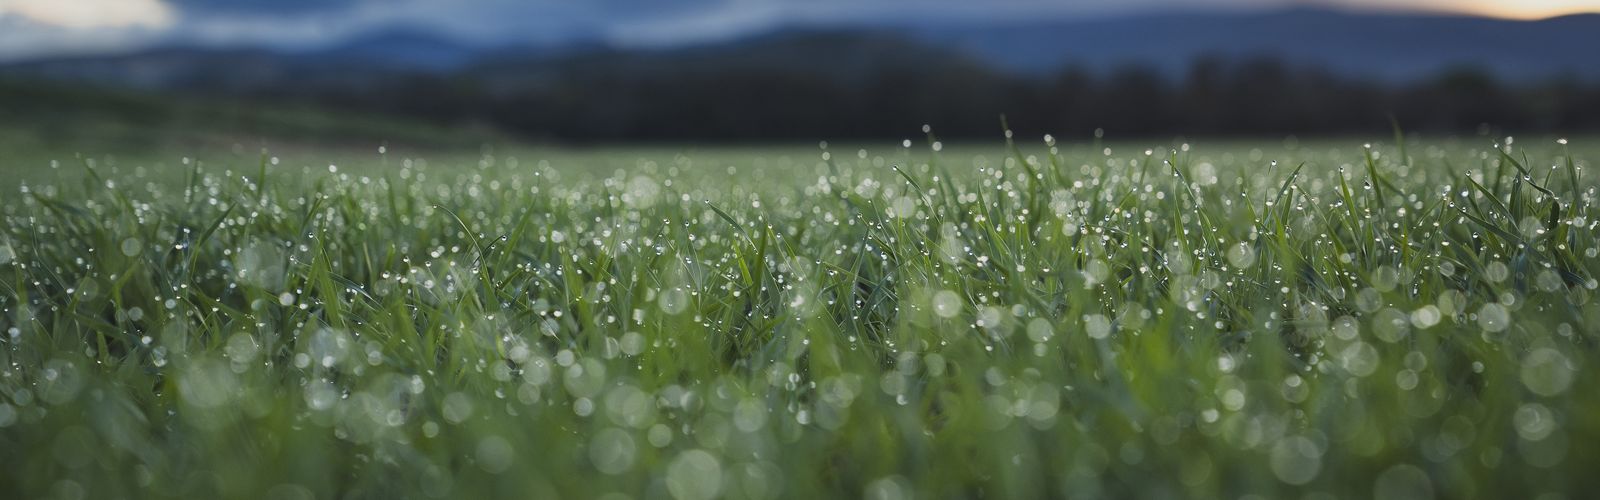 Dew beads on young wheat in the foreground. In the background, blurry clouds travel over distant dark mountains. 